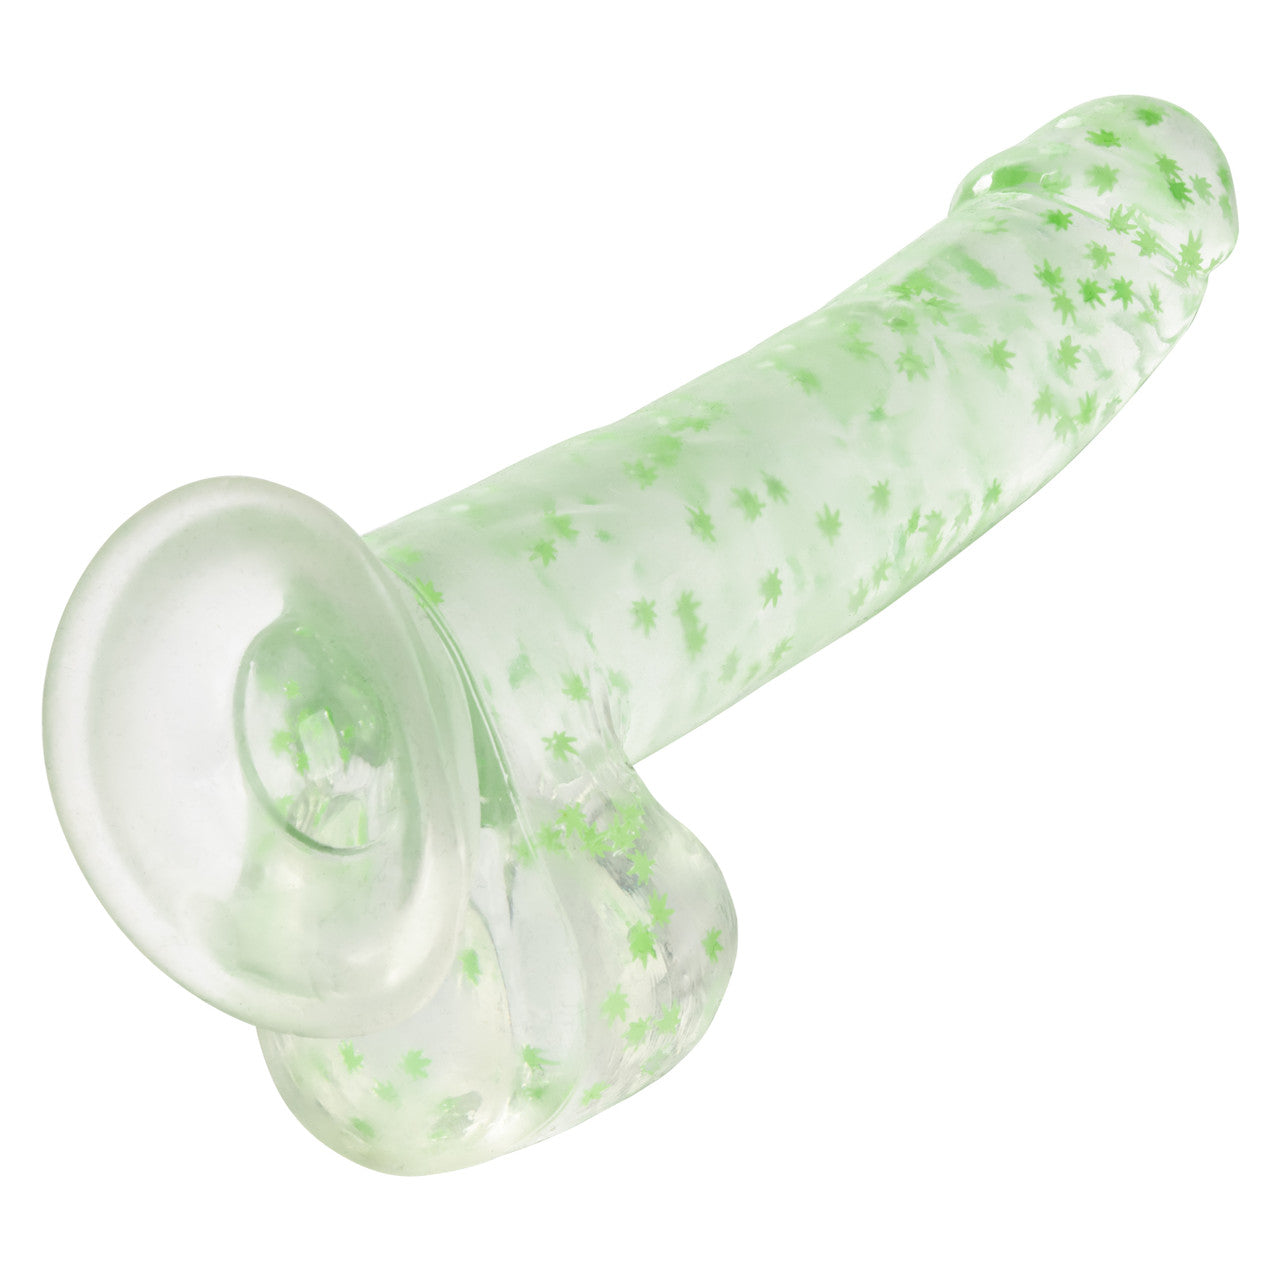 Naughty Bits I Leaf Dick Glow-In-The-Dark Weed Leaf Dildo - Thorn & Feather